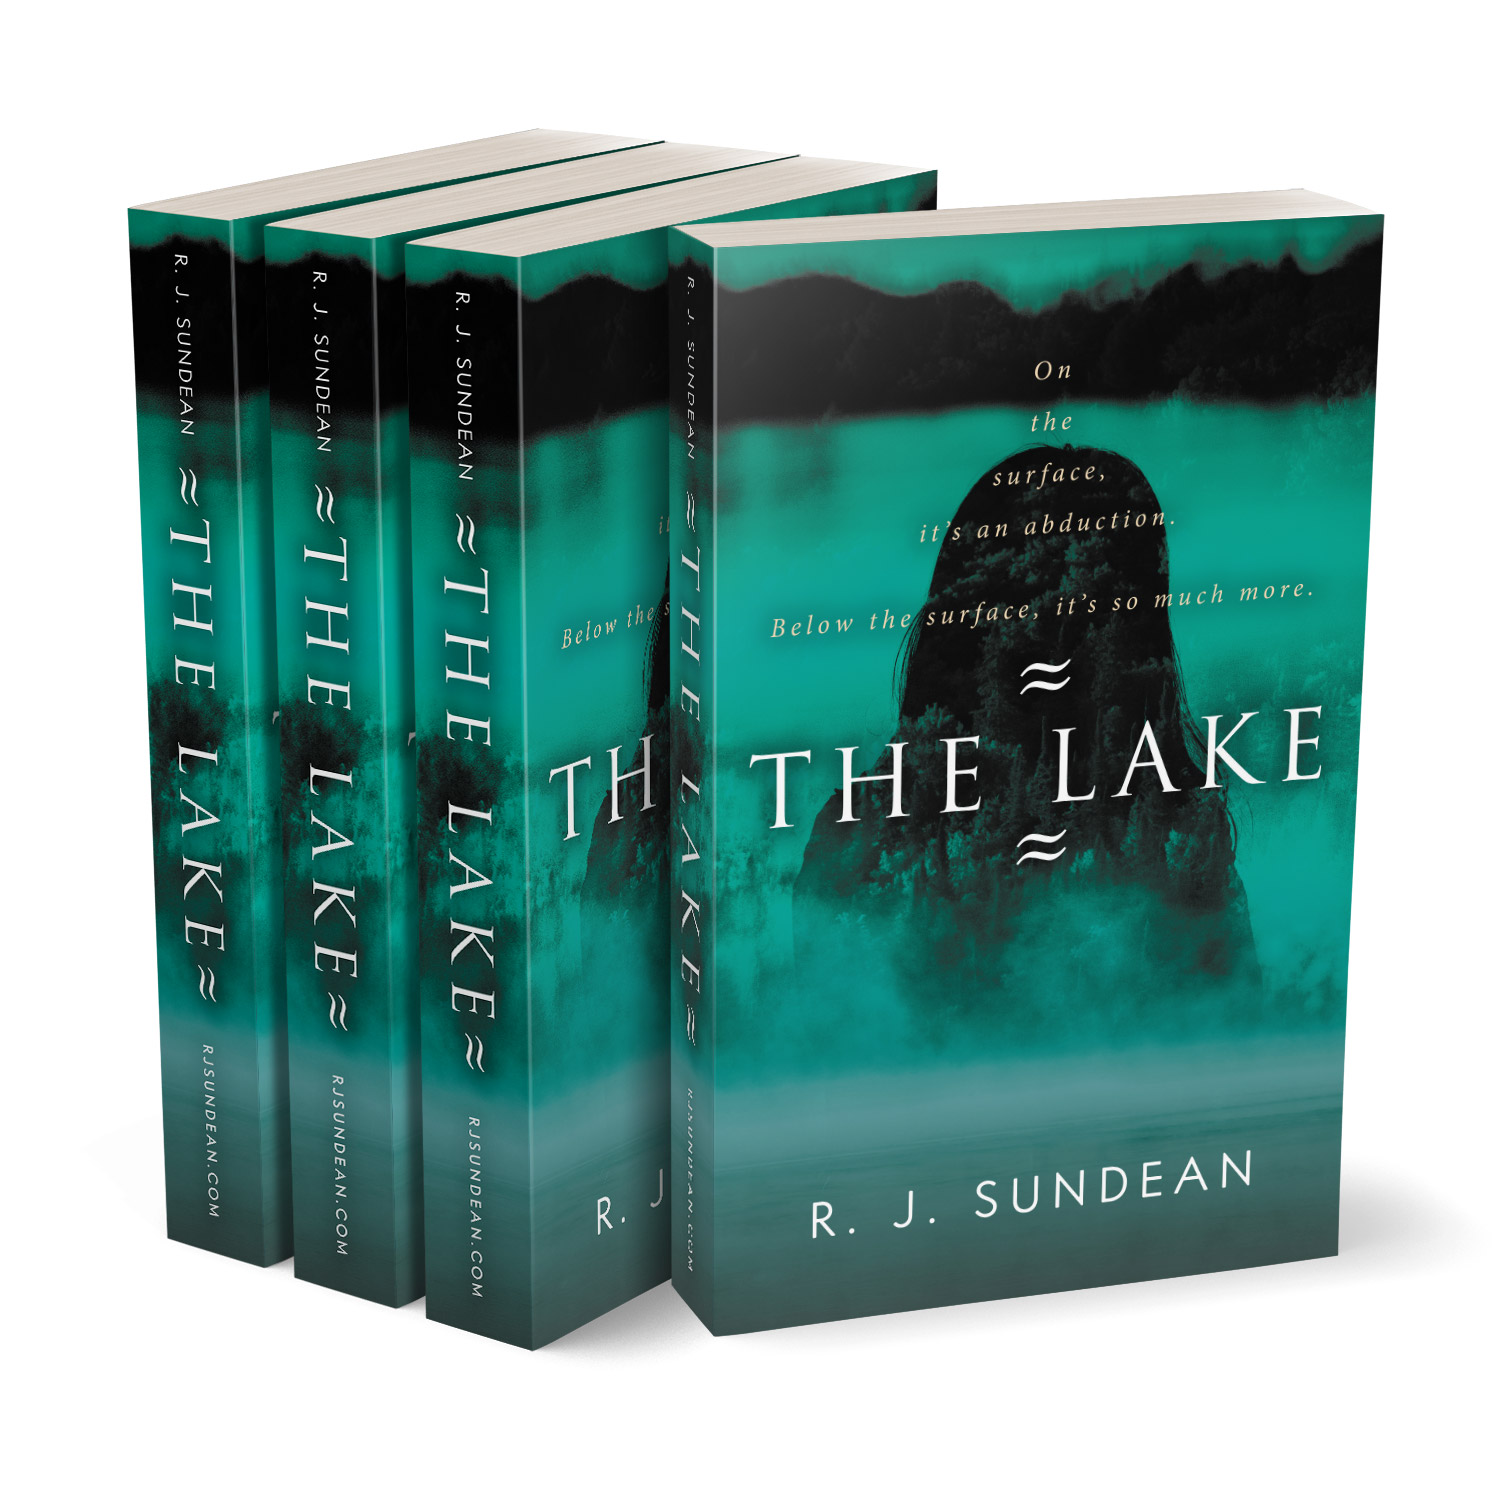 'The Lakes' is an atmospheric threat thriller. The author is RJ Sundean. The cover and interior design of the book are by Mark Thomas. To learn more about what Mark could do for your book, please visit coverness.com.